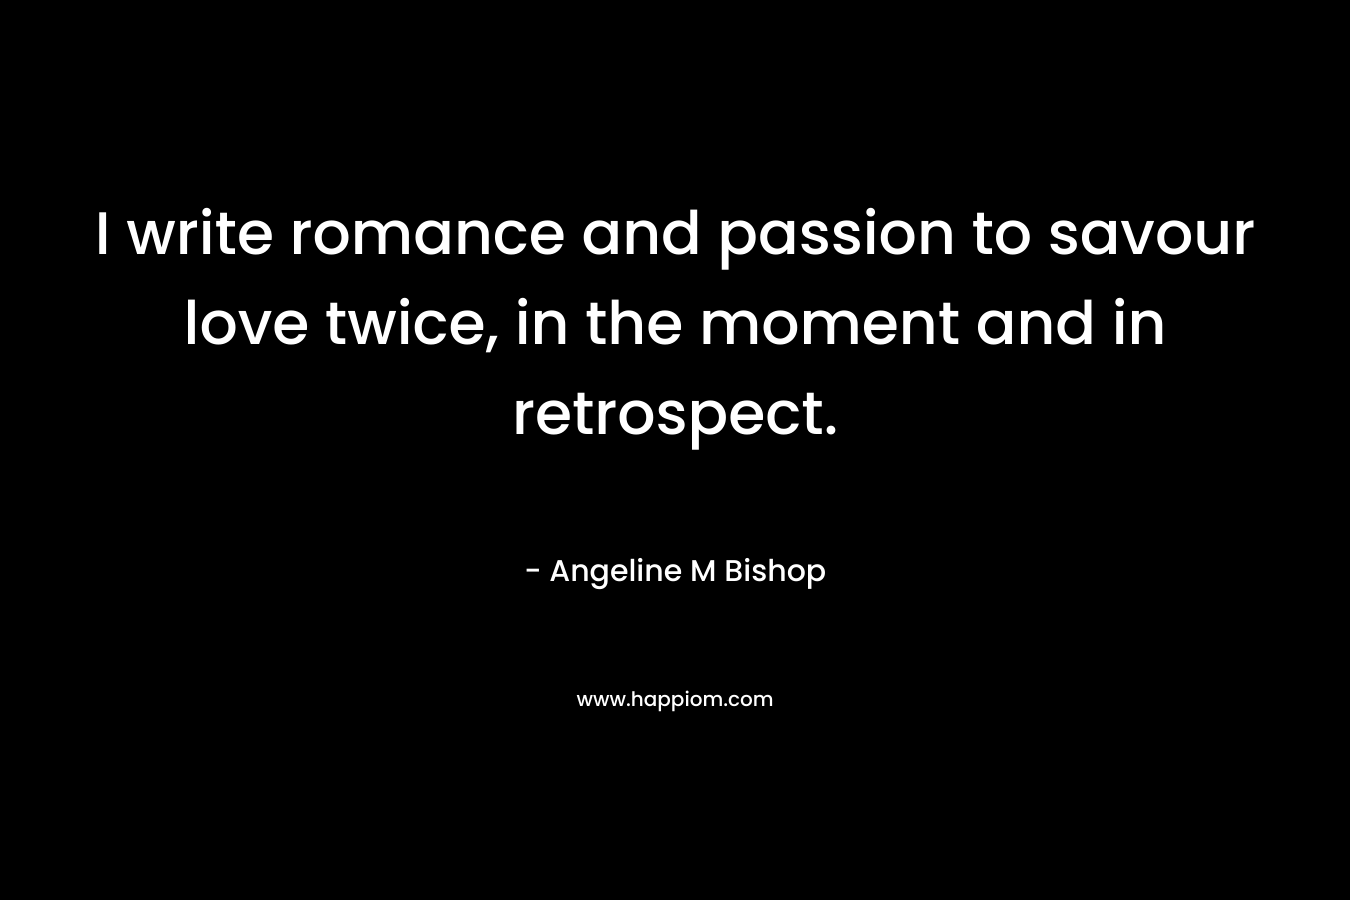 I write romance and passion to savour love twice, in the moment and in retrospect. – Angeline M Bishop